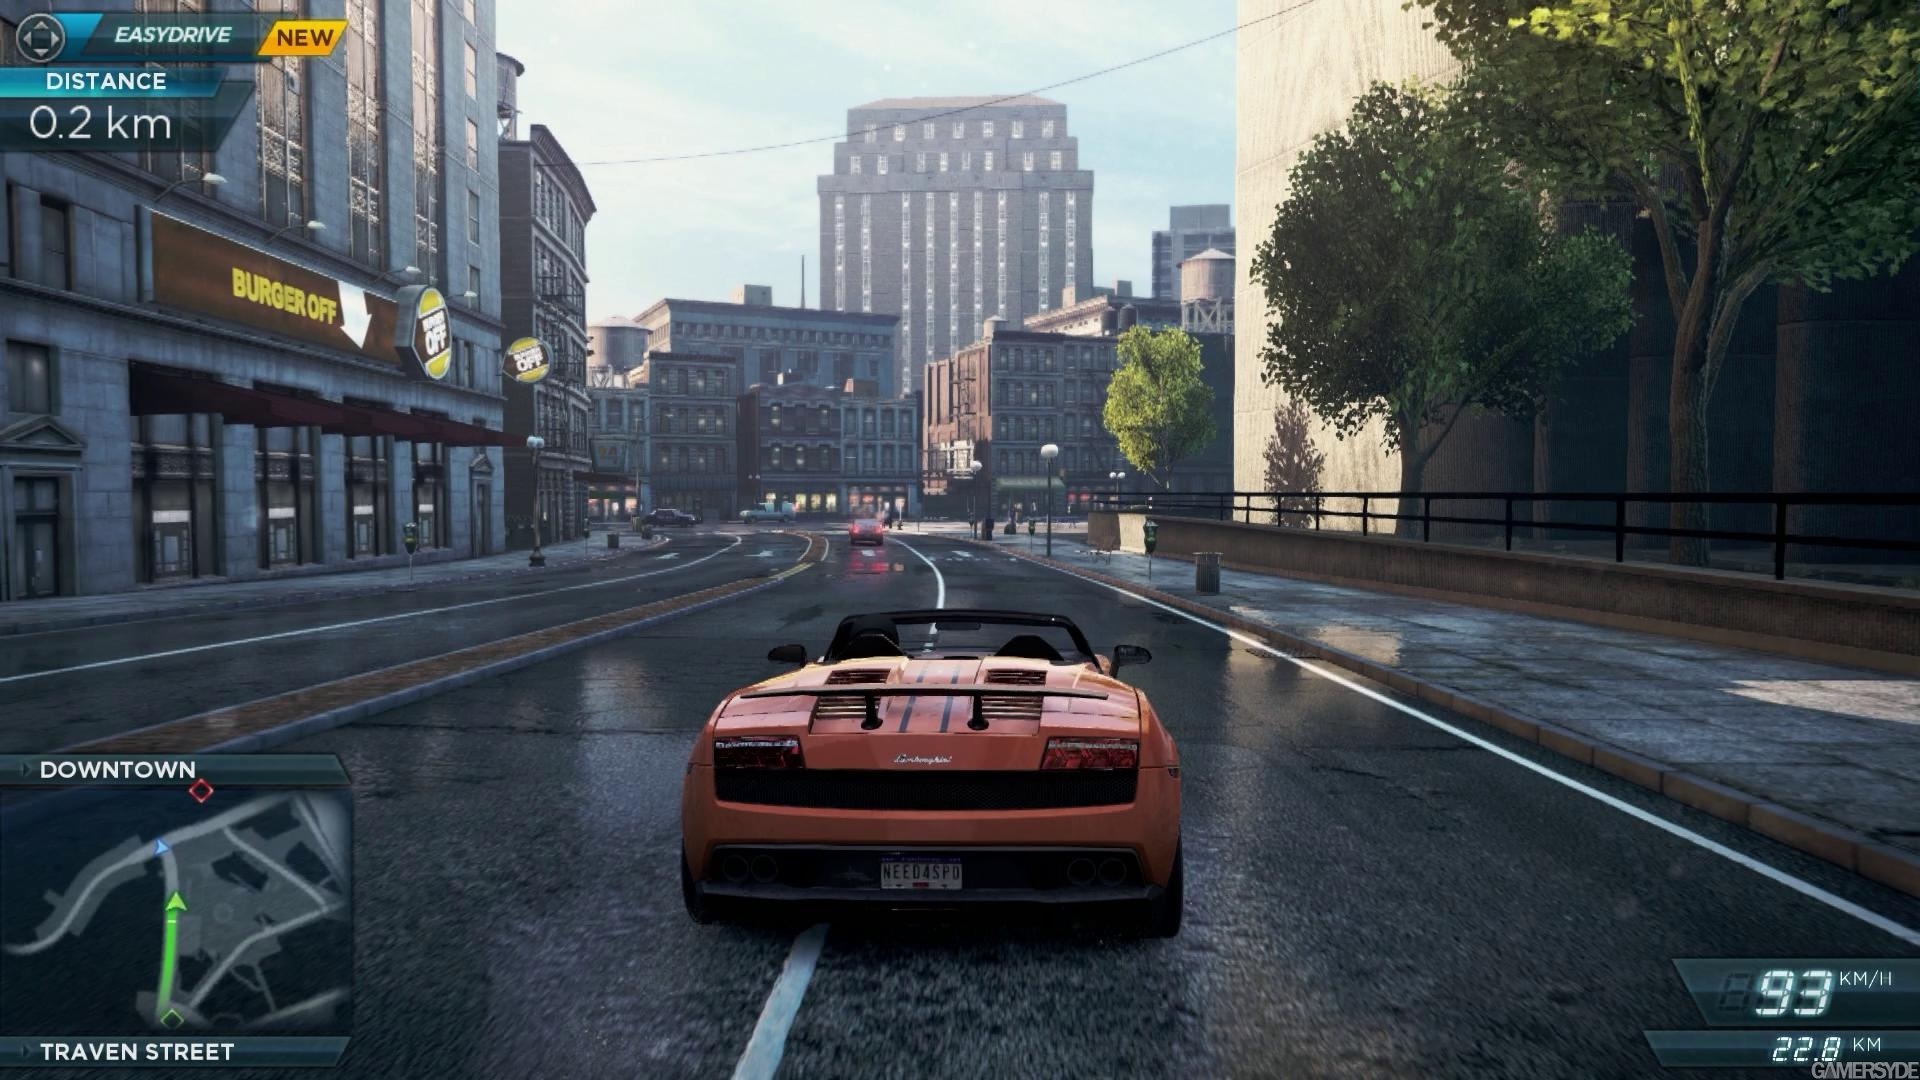 need for speed most wanted pc mega